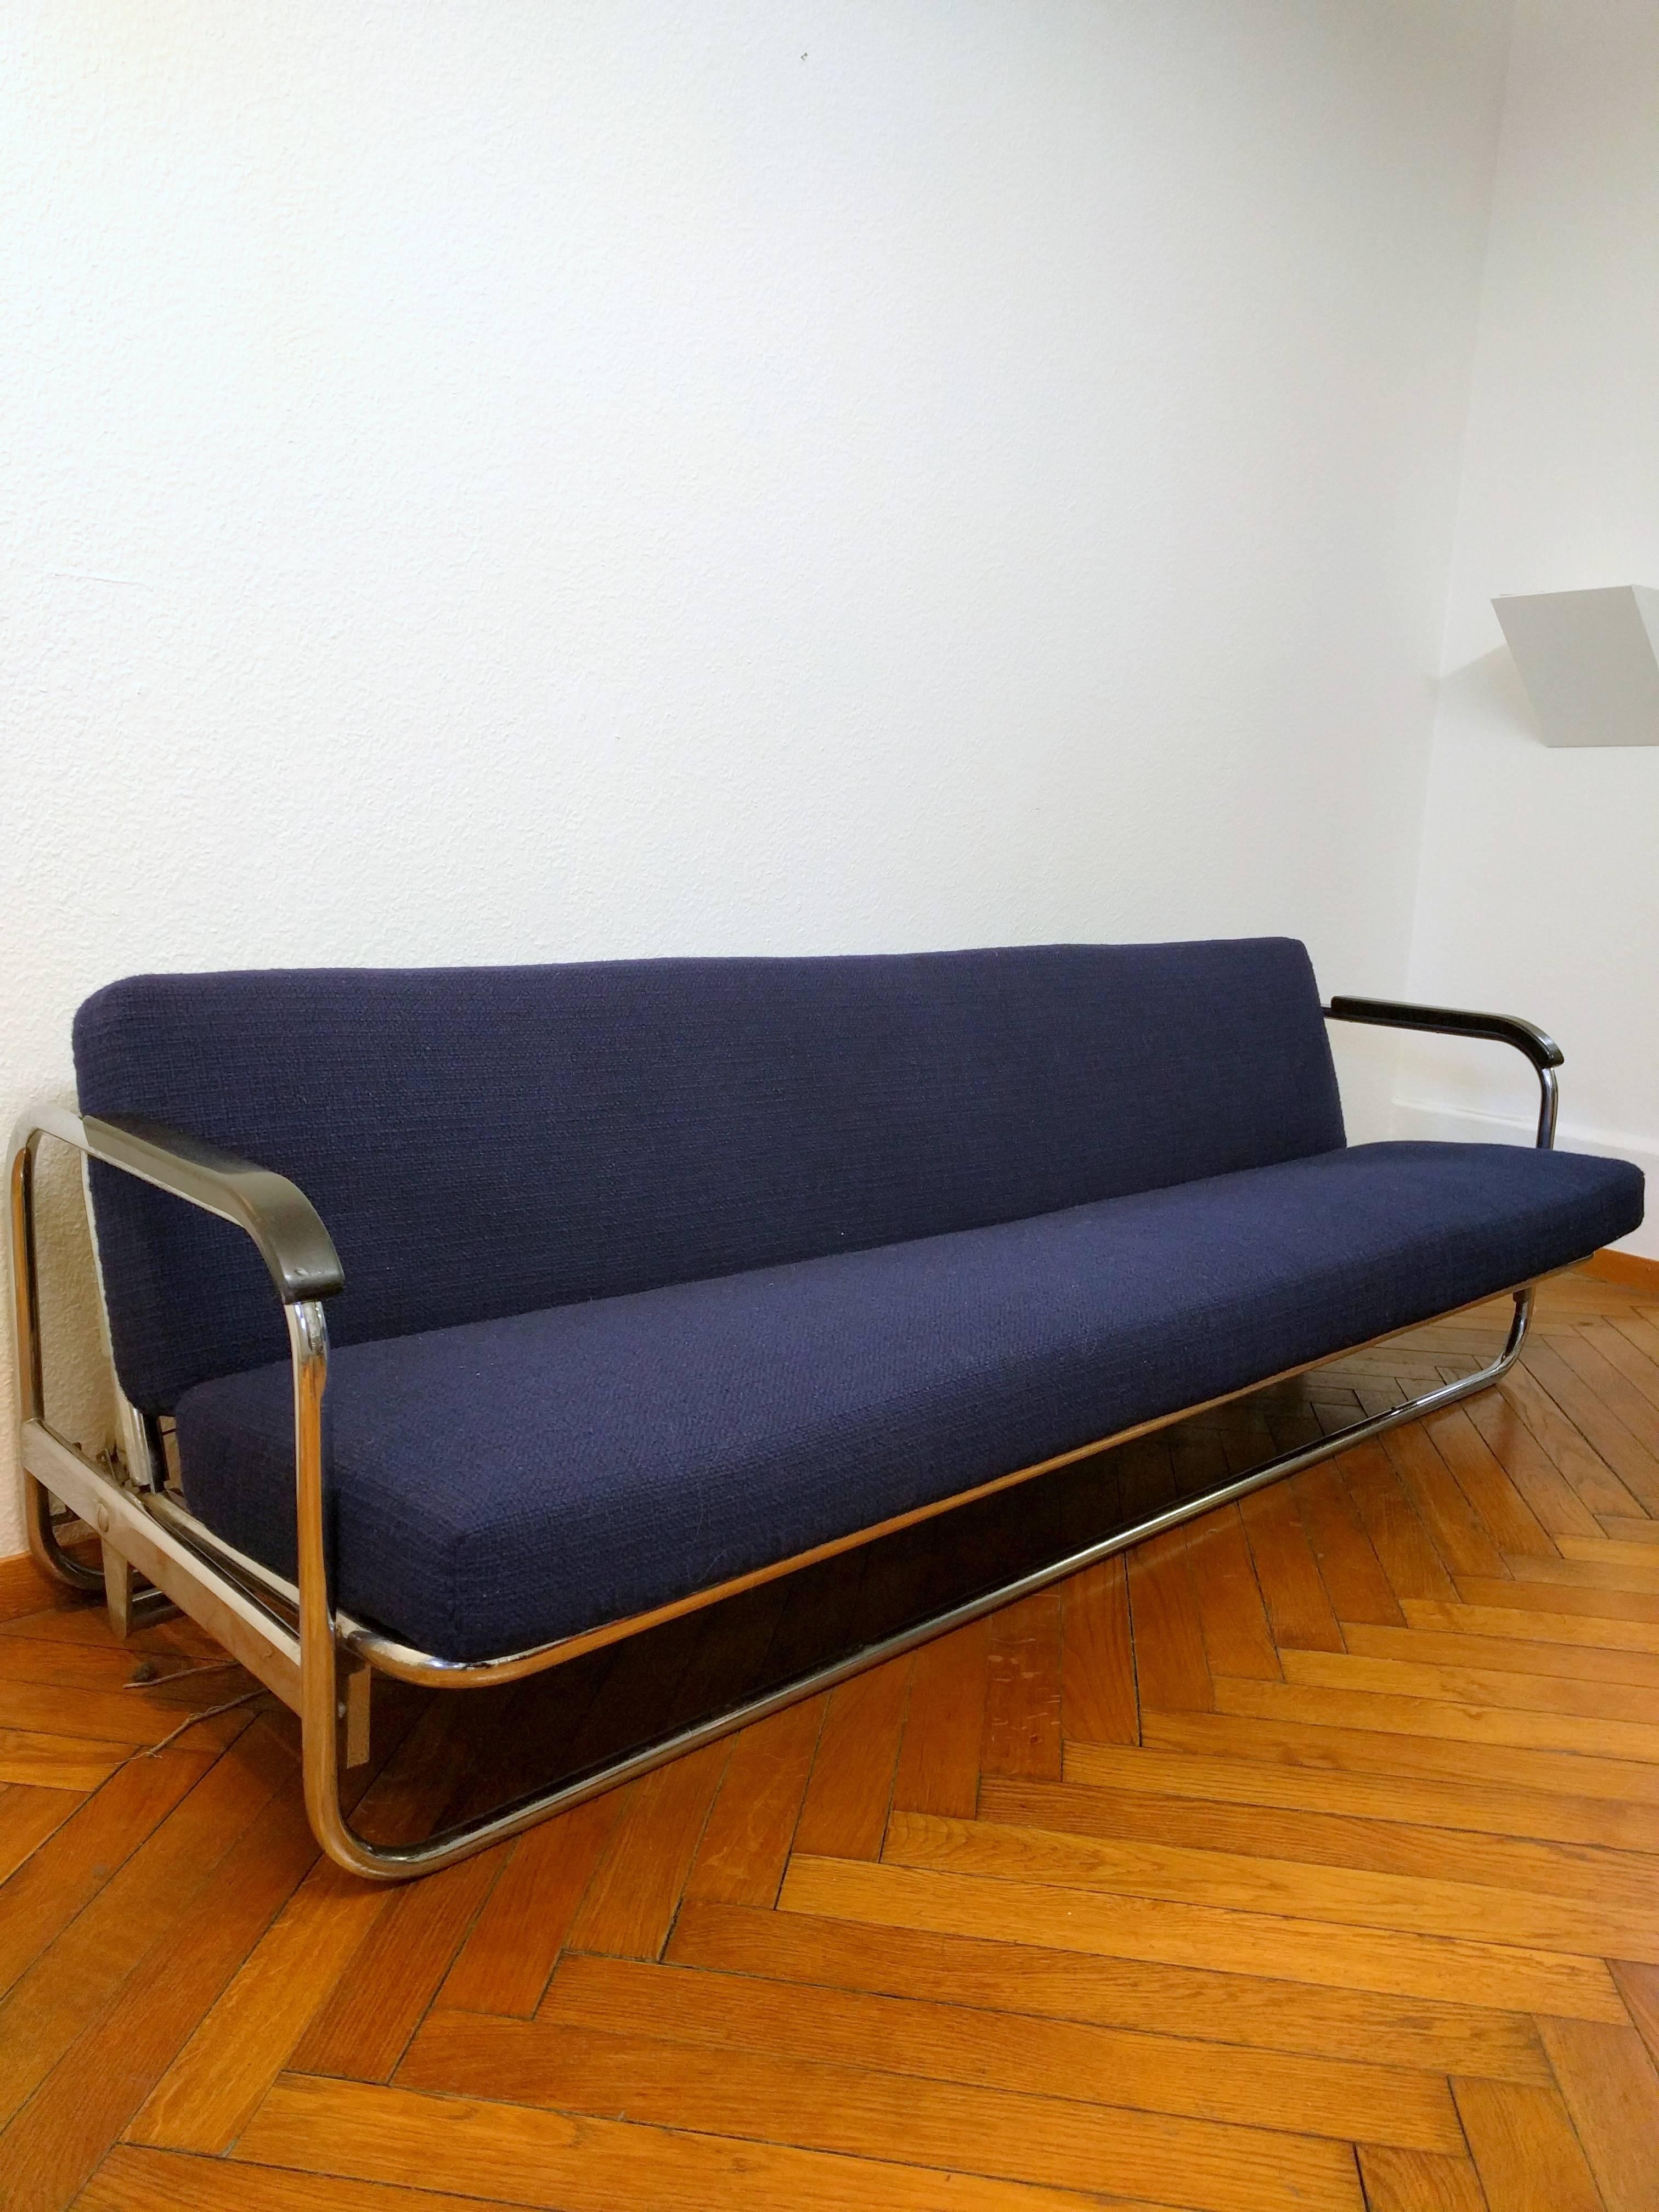 Alvar Aalto bed sofa with adjustable seat and back until you get a single bed.
It´s made with tubular chromed steel and the armrests are made with wood.